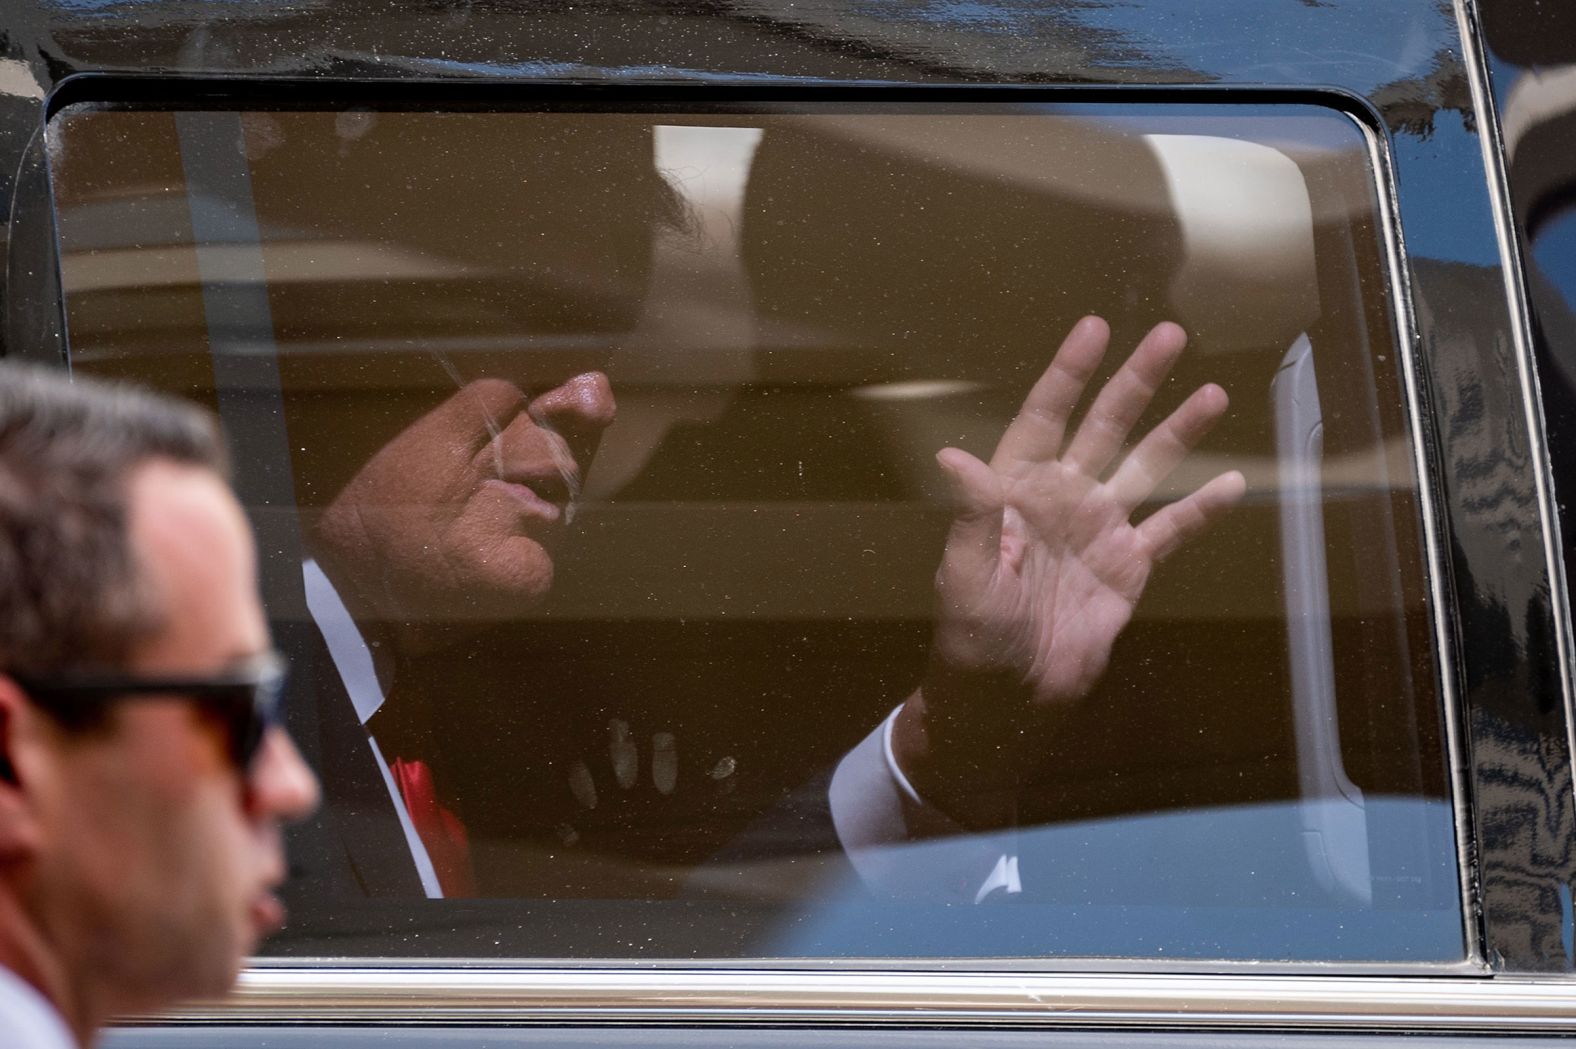 Trump waves to supporters as his motorcade leaves a federal courthouse in Miami in June 2023. Special counsel Jack Smith brought charges against Trump in a case <a href="index.php?page=&url=https%3A%2F%2Fwww.cnn.com%2F2023%2F06%2F08%2Fpolitics%2Ftrump-indictment-truth-social-classified-documents%2Findex.html" target="_blank">alleging mishandling of classified documents</a>. Trump pleaded not guilty.